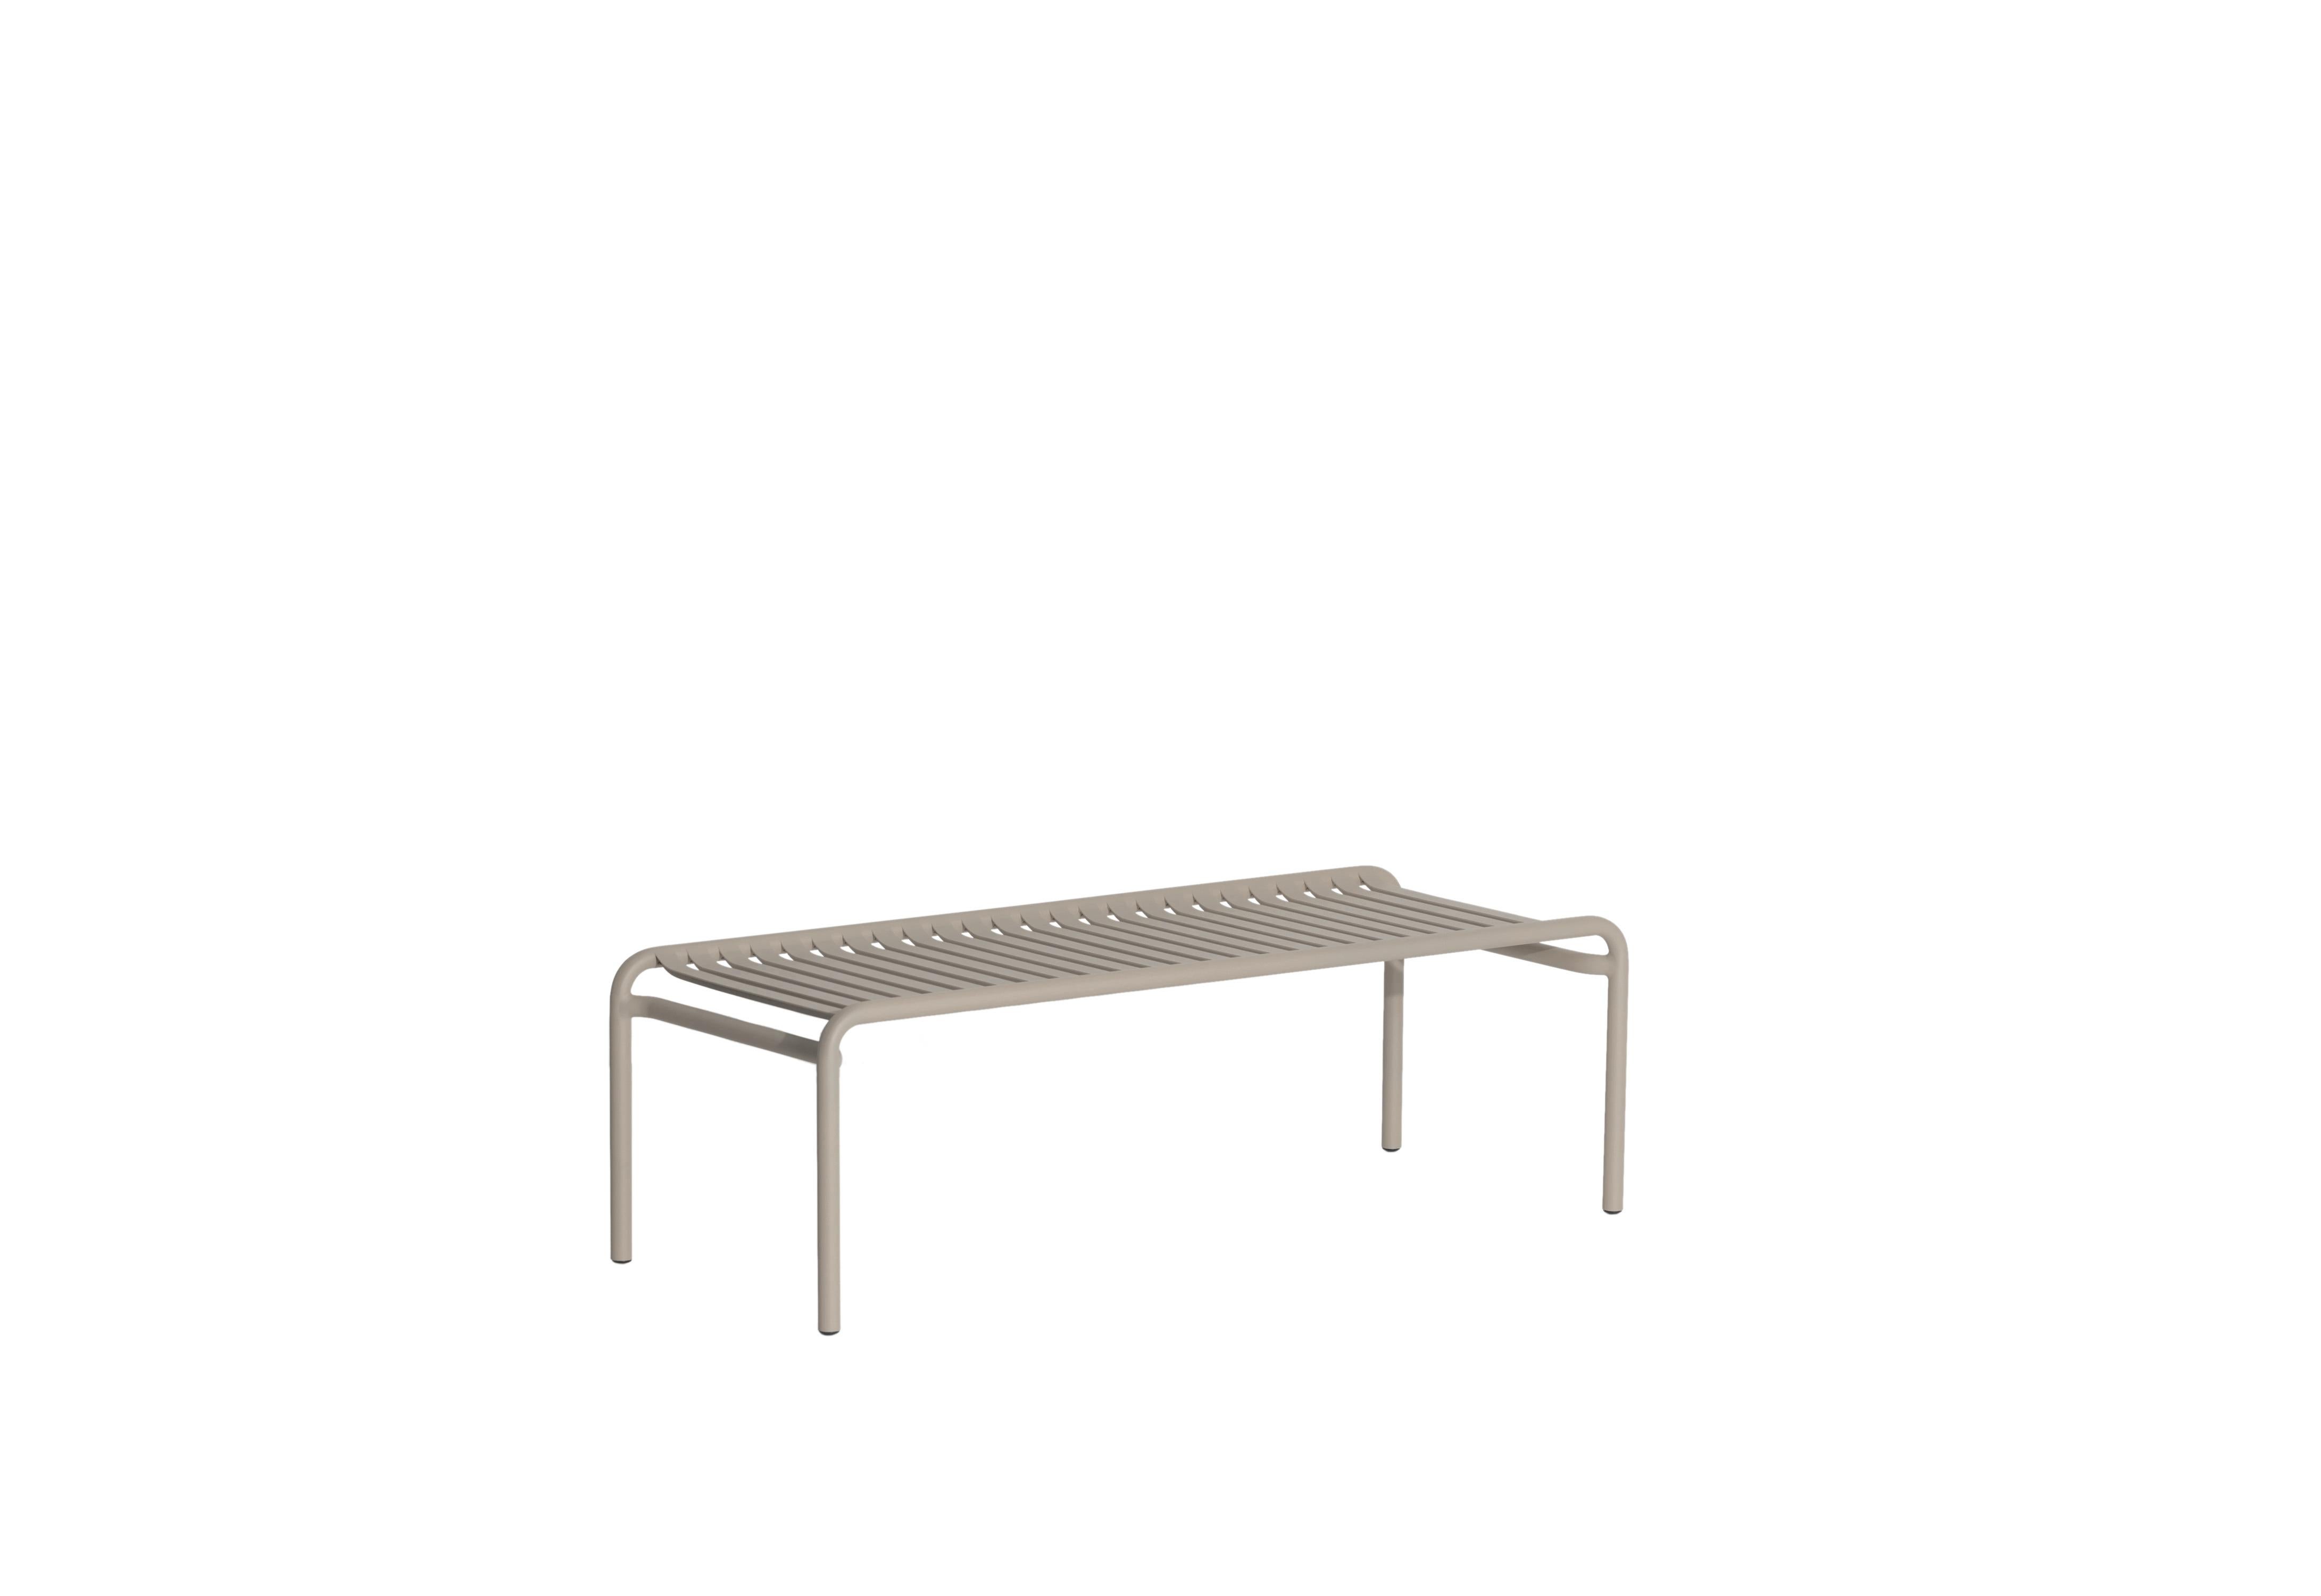 Petite Friture Week-End Long Coffee Table in Dune Aluminium by Studio BrichetZiegler, 2017

The week-end collection is a full range of outdoor furniture, in aluminium grained epoxy paint, matt finish, that includes 18 functions and 8 colours for